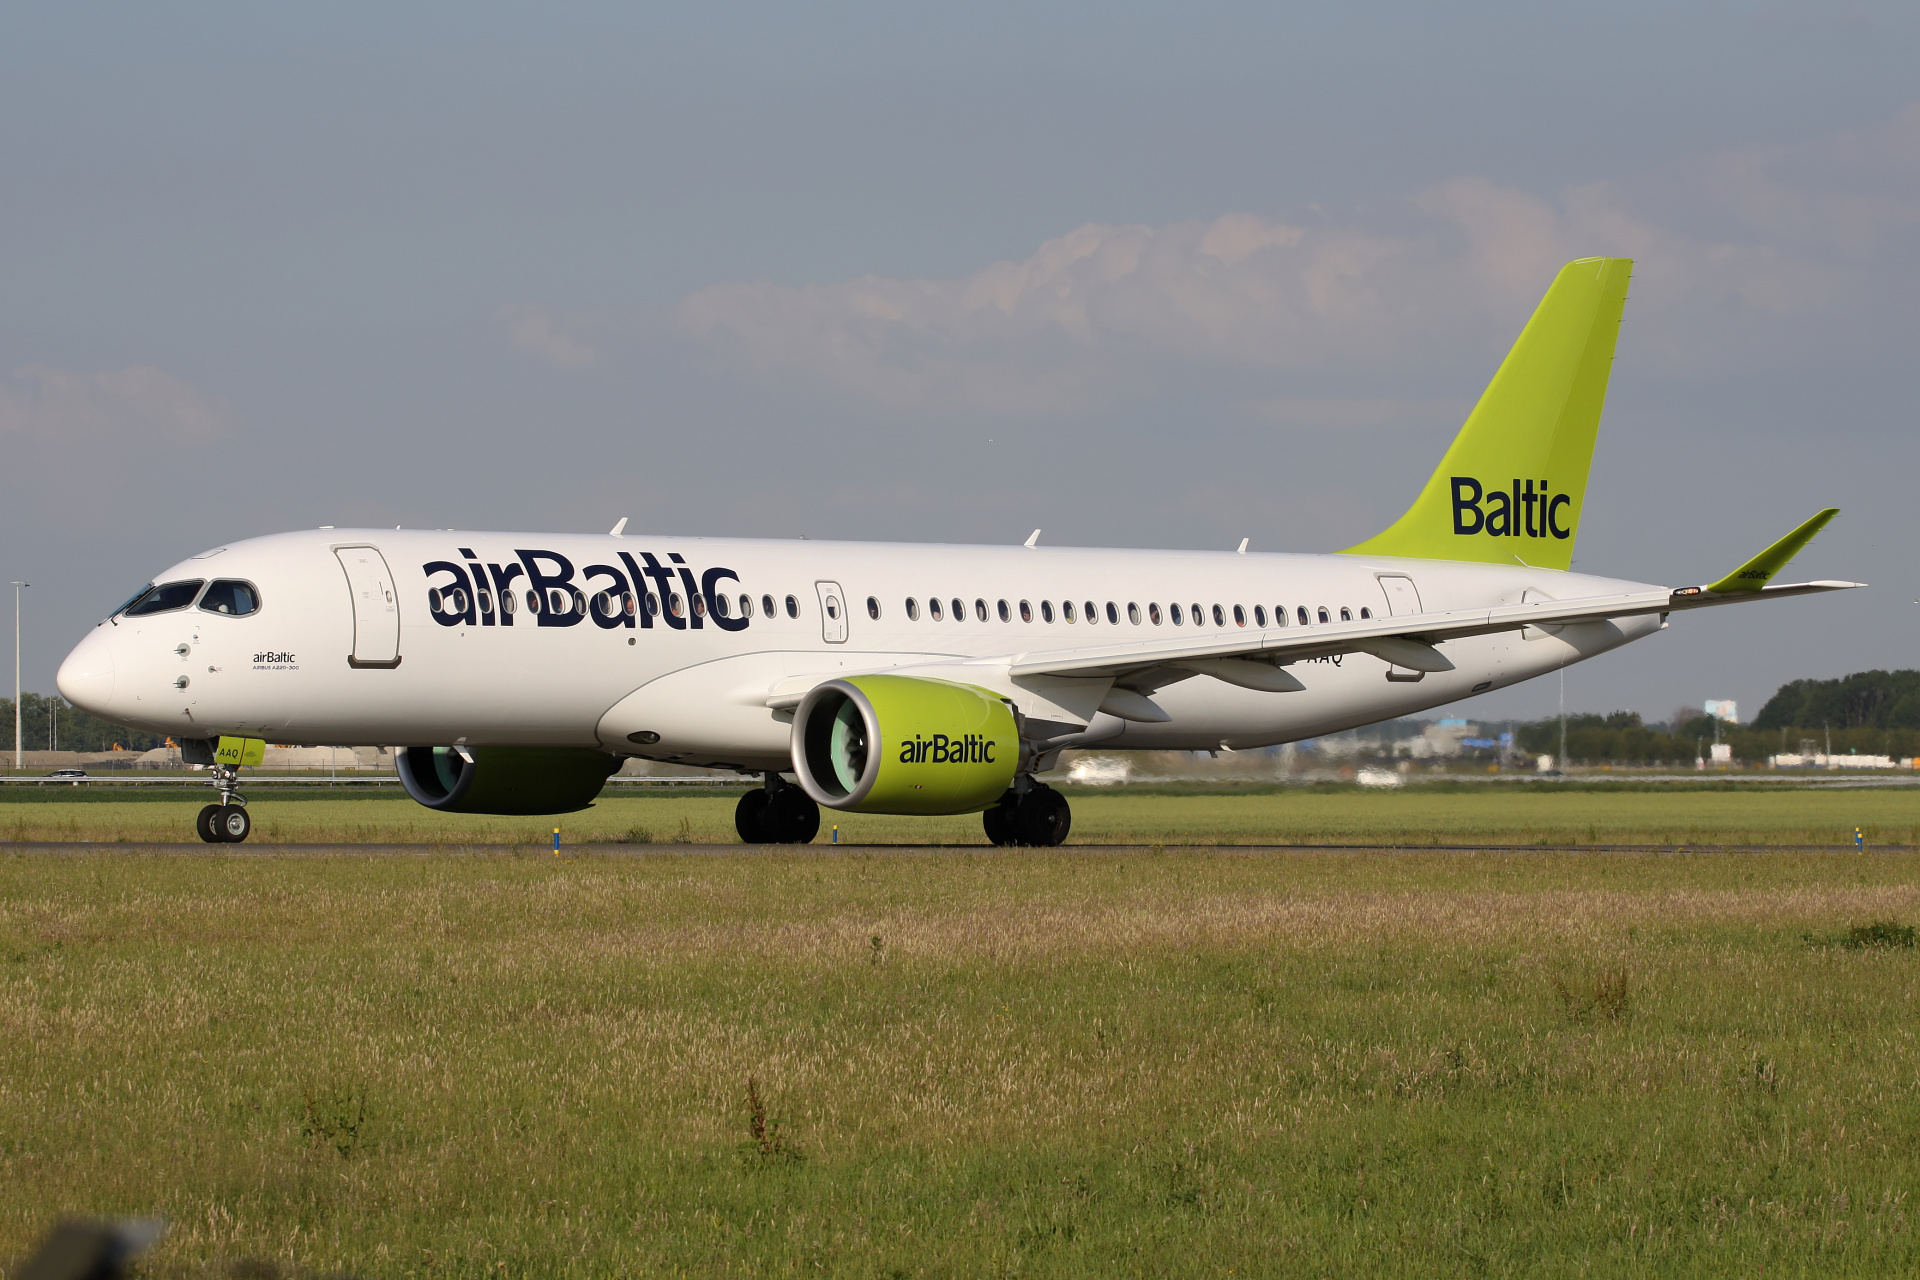 YL-AAQ, AirBaltic (Aircraft » Schiphol Spotting » Airbus A220-300)